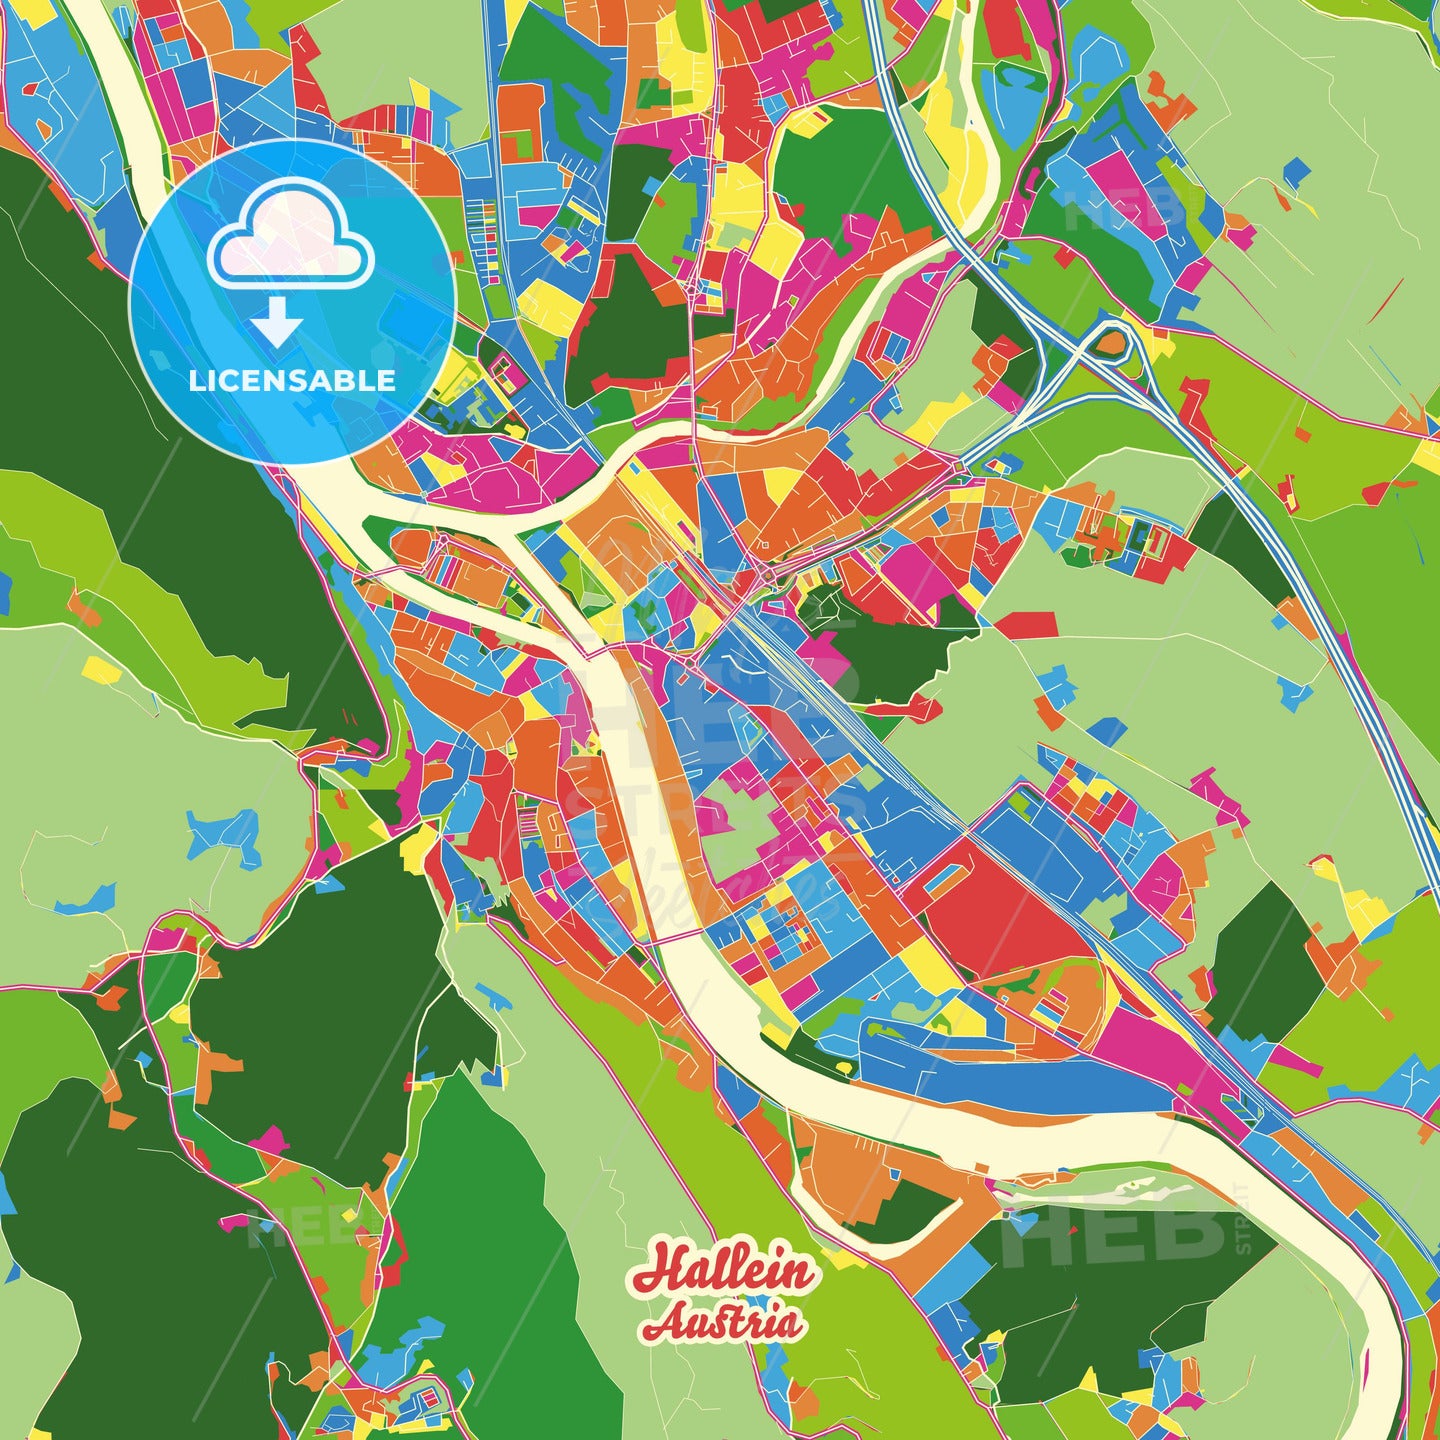 Hallein, Austria Crazy Colorful Street Map Poster Template - HEBSTREITS Sketches